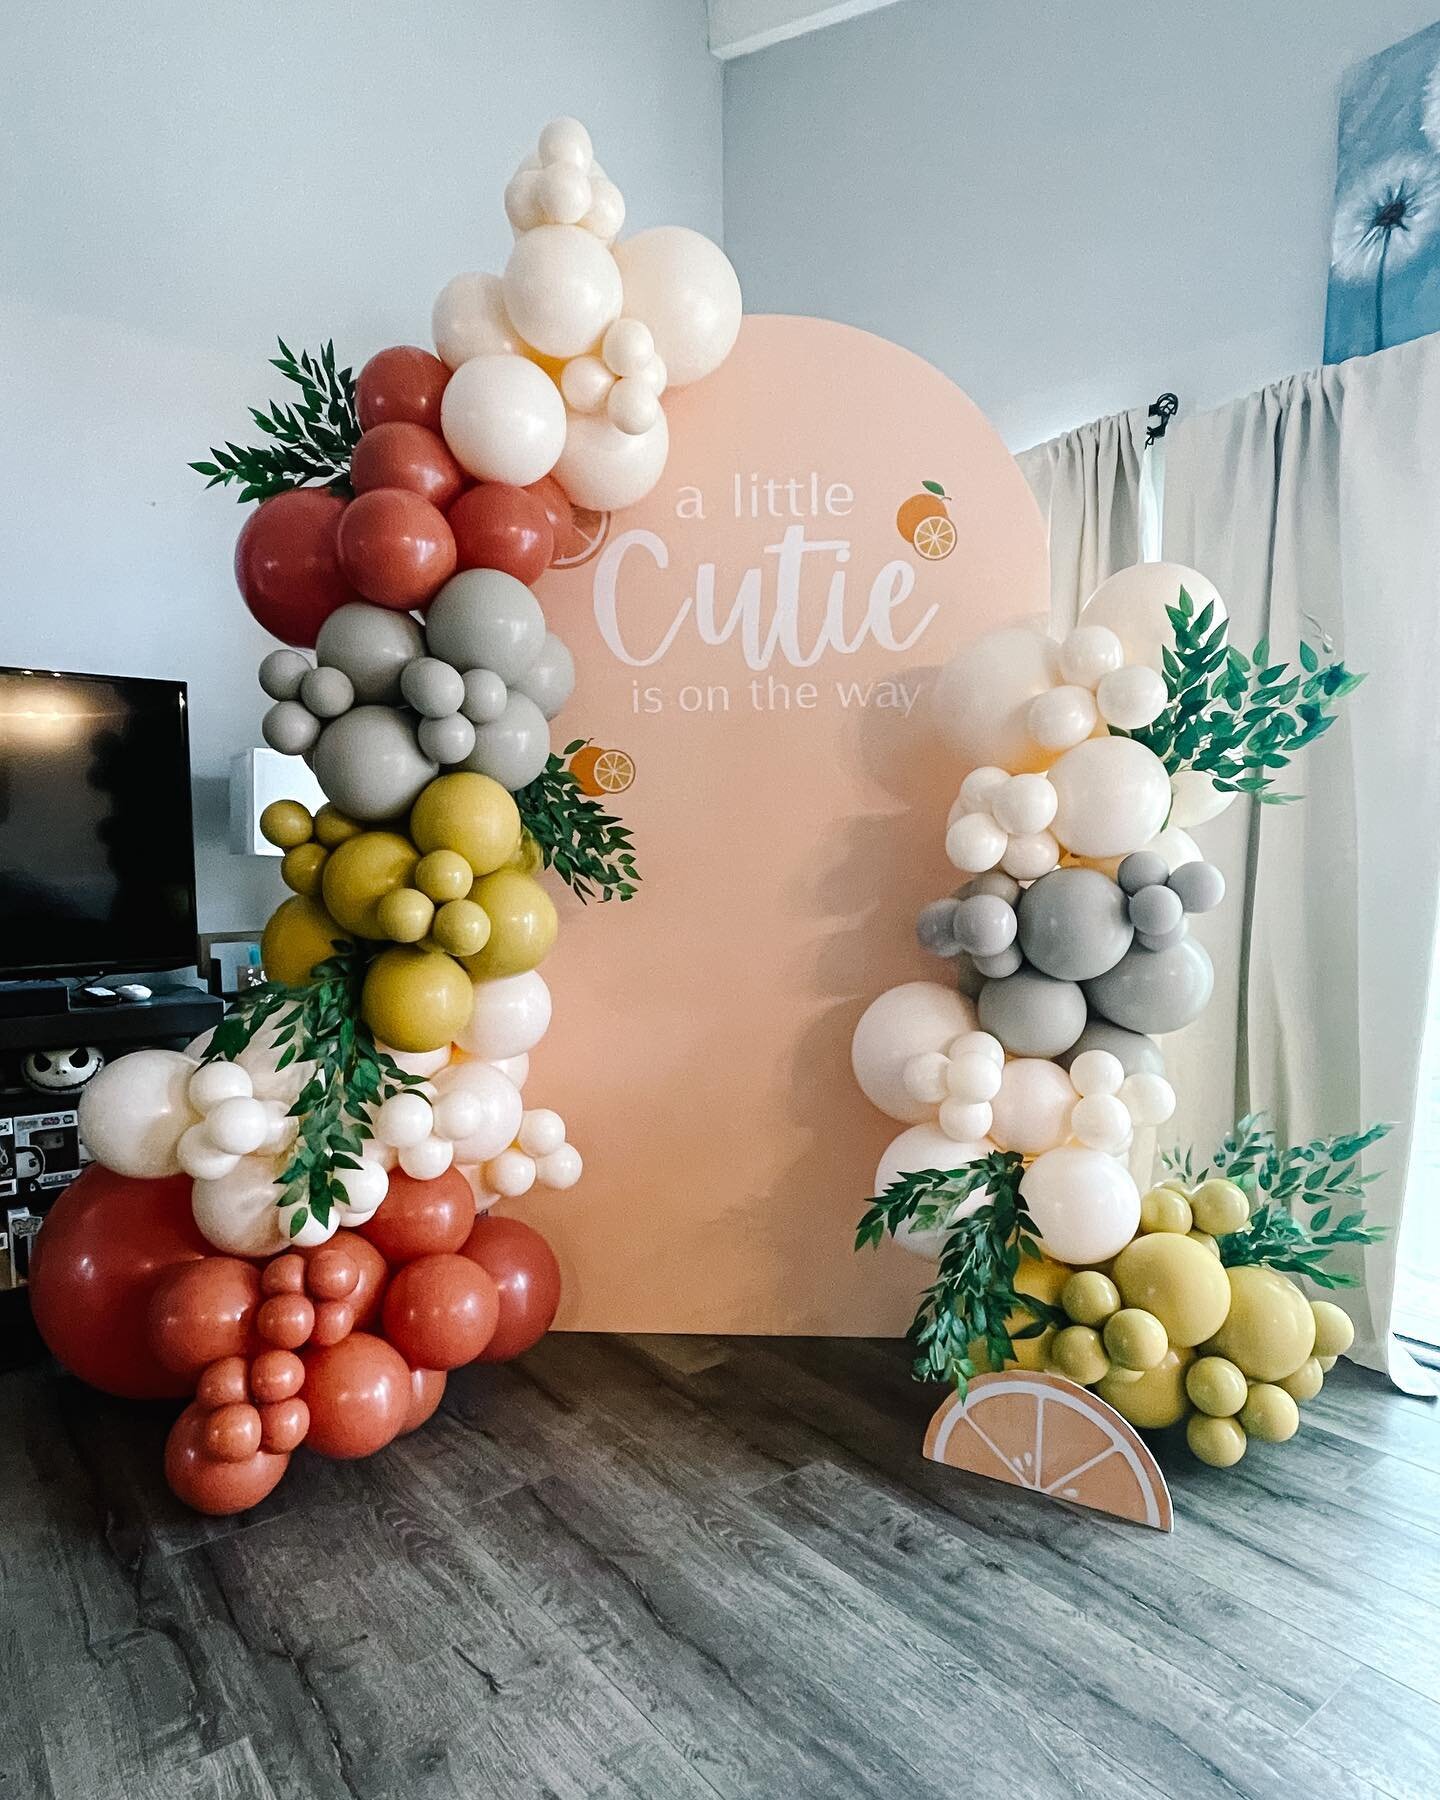 Congratulations to the parents-to-be on their little 🍊!

#whitebouncehouse #whitebouncehousesandiego #modernbouncehouse #balloonssandiego #balloondecor #balloongarland #sandiegoparty #sandiegopartyplanner #sandiegopartydecor #sandiegokids #sandiegom